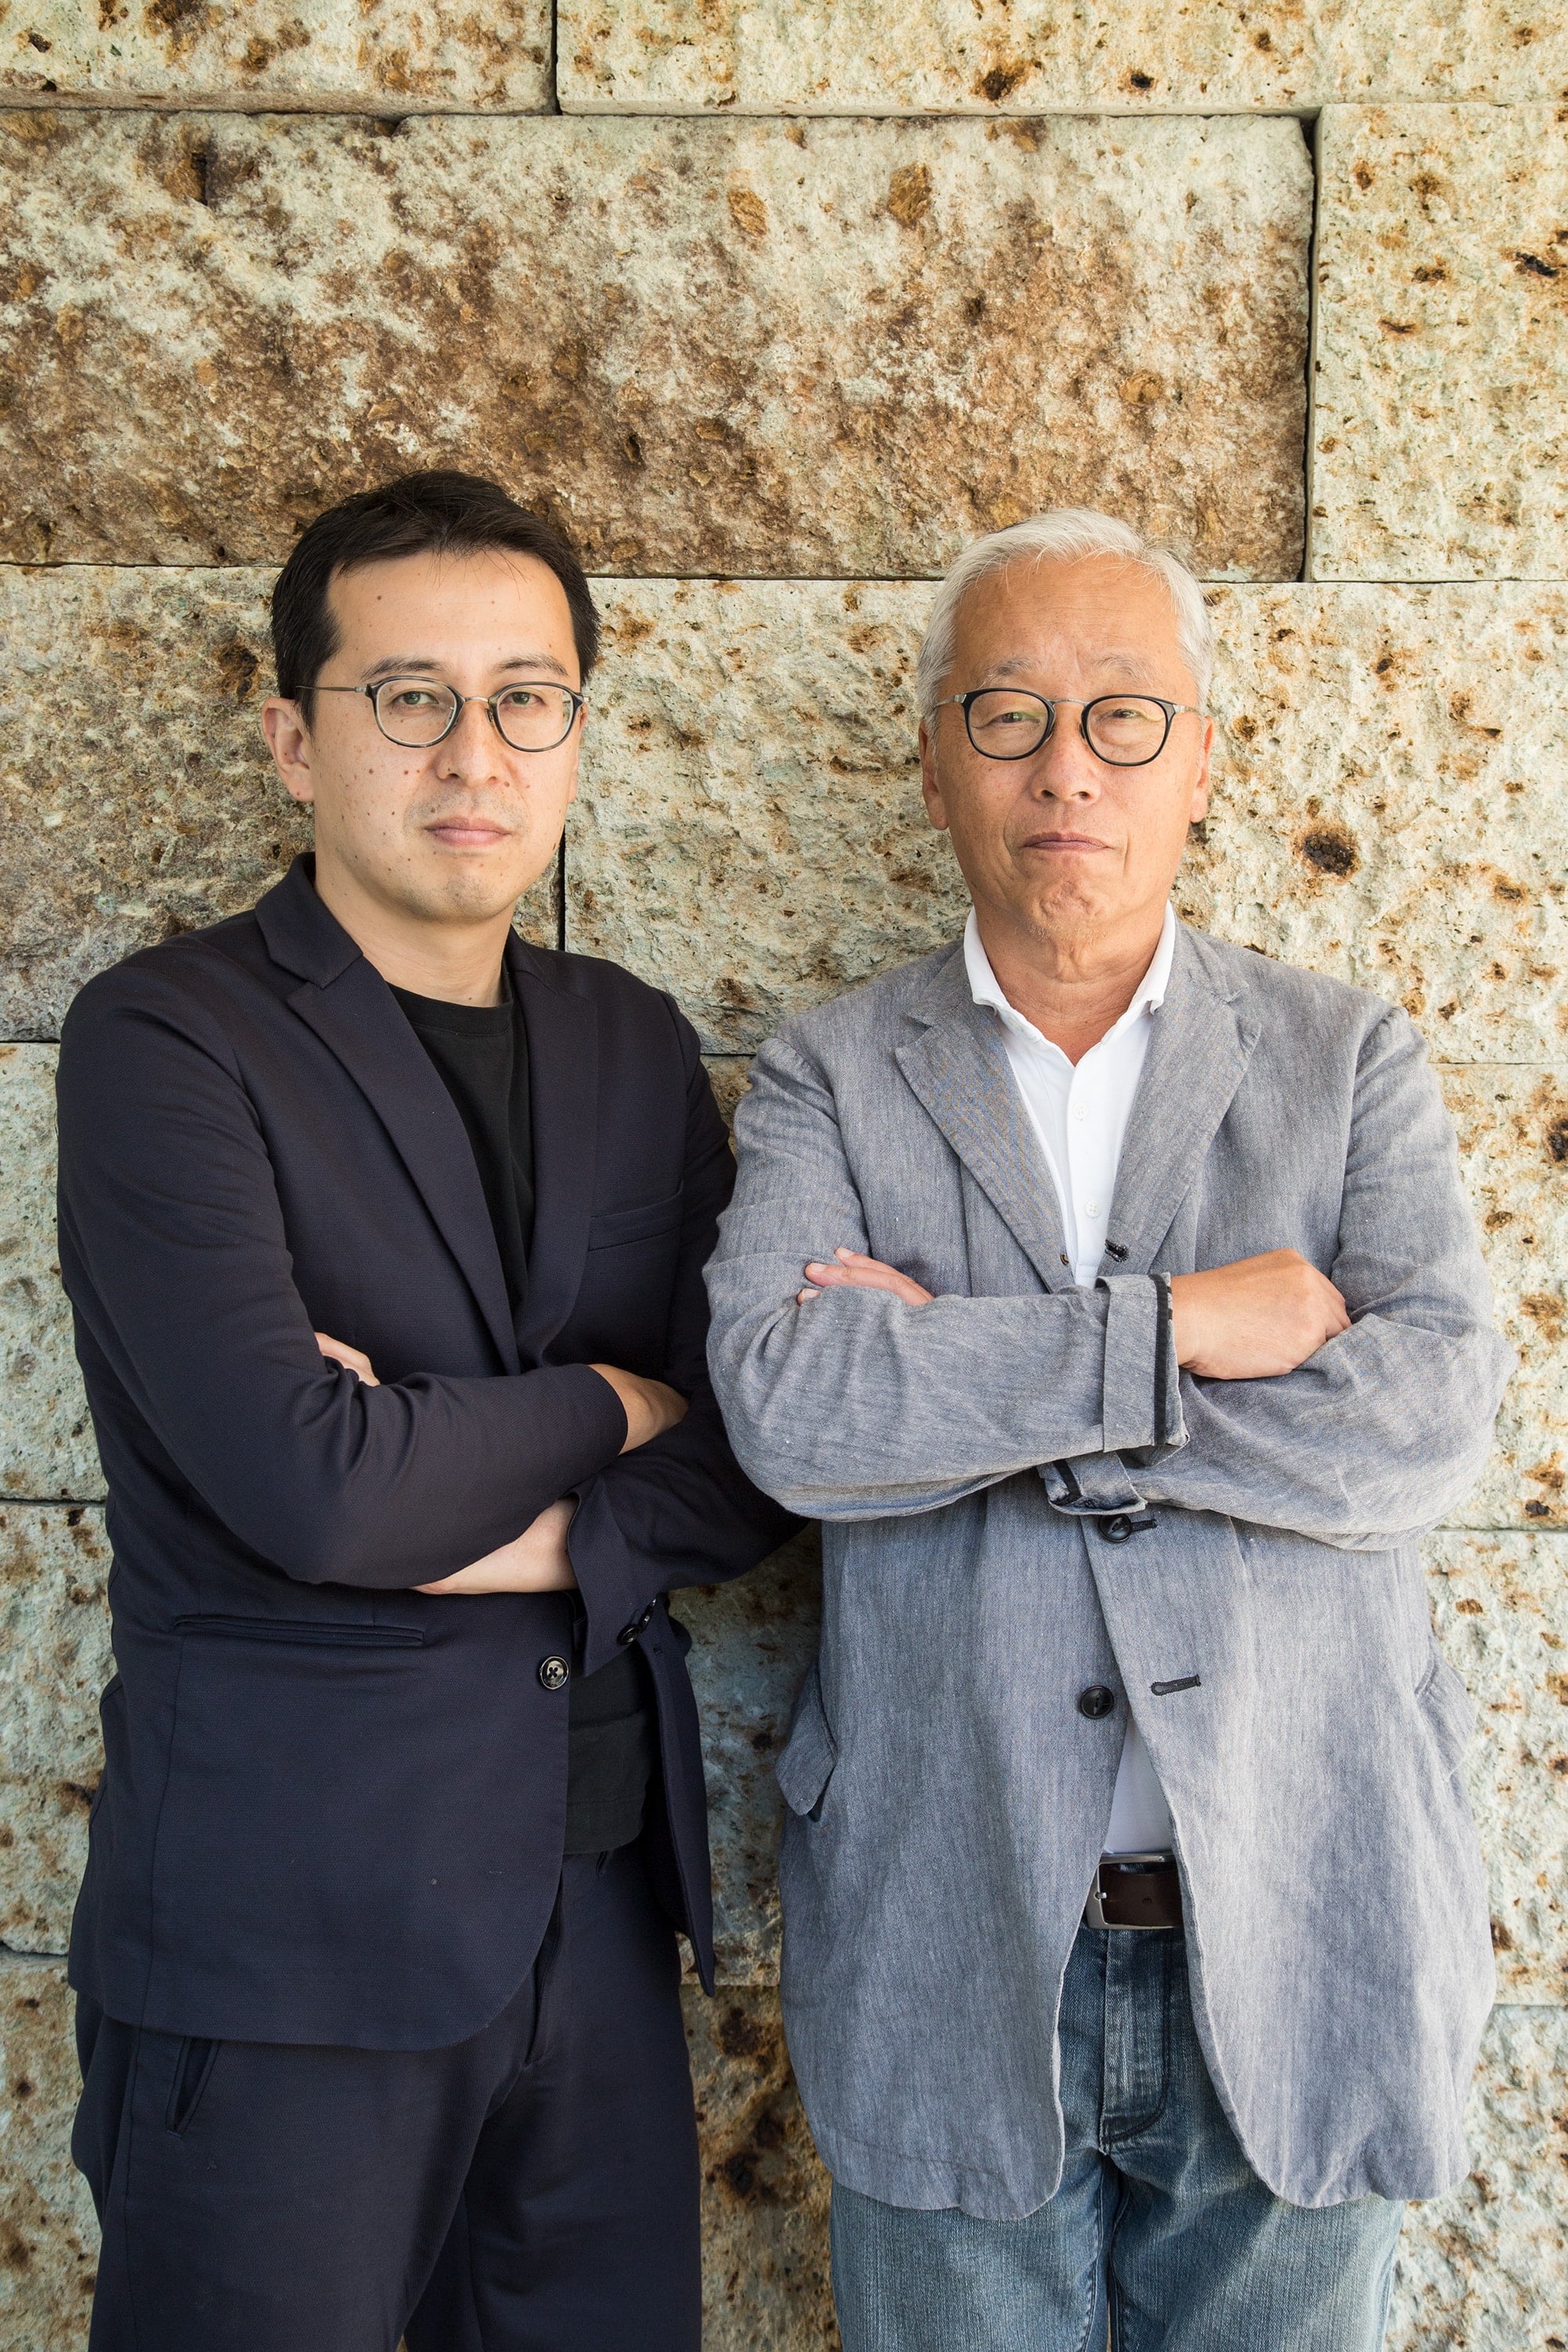 Hiroshi Sugimoto (Right) and Tomoyuki Sakakida (Left). The wall stone behind the two is the Oya Stone from Enoura Observatory.